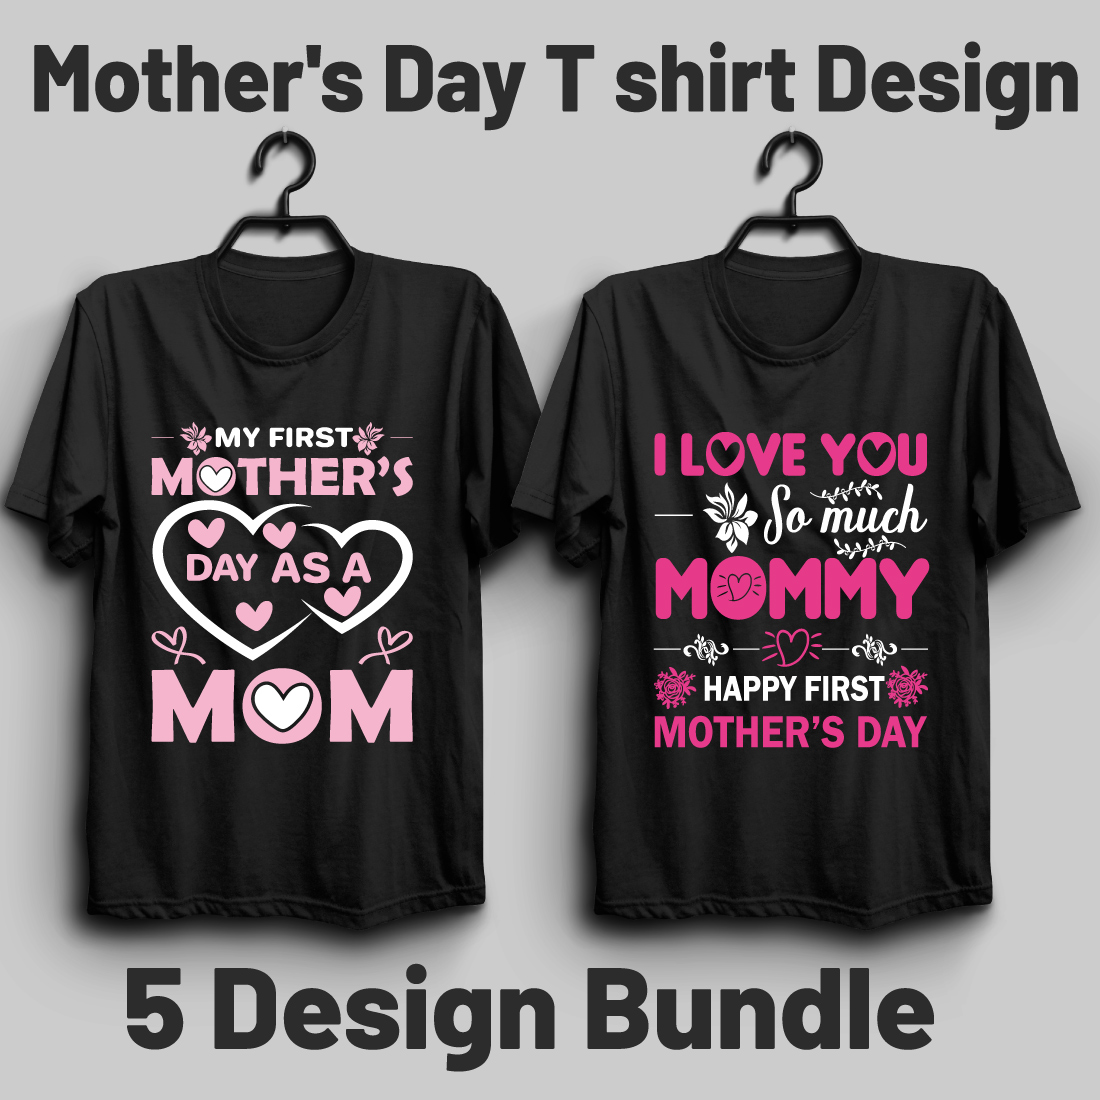 Mother's Day T shirt Design Bundle cover image.